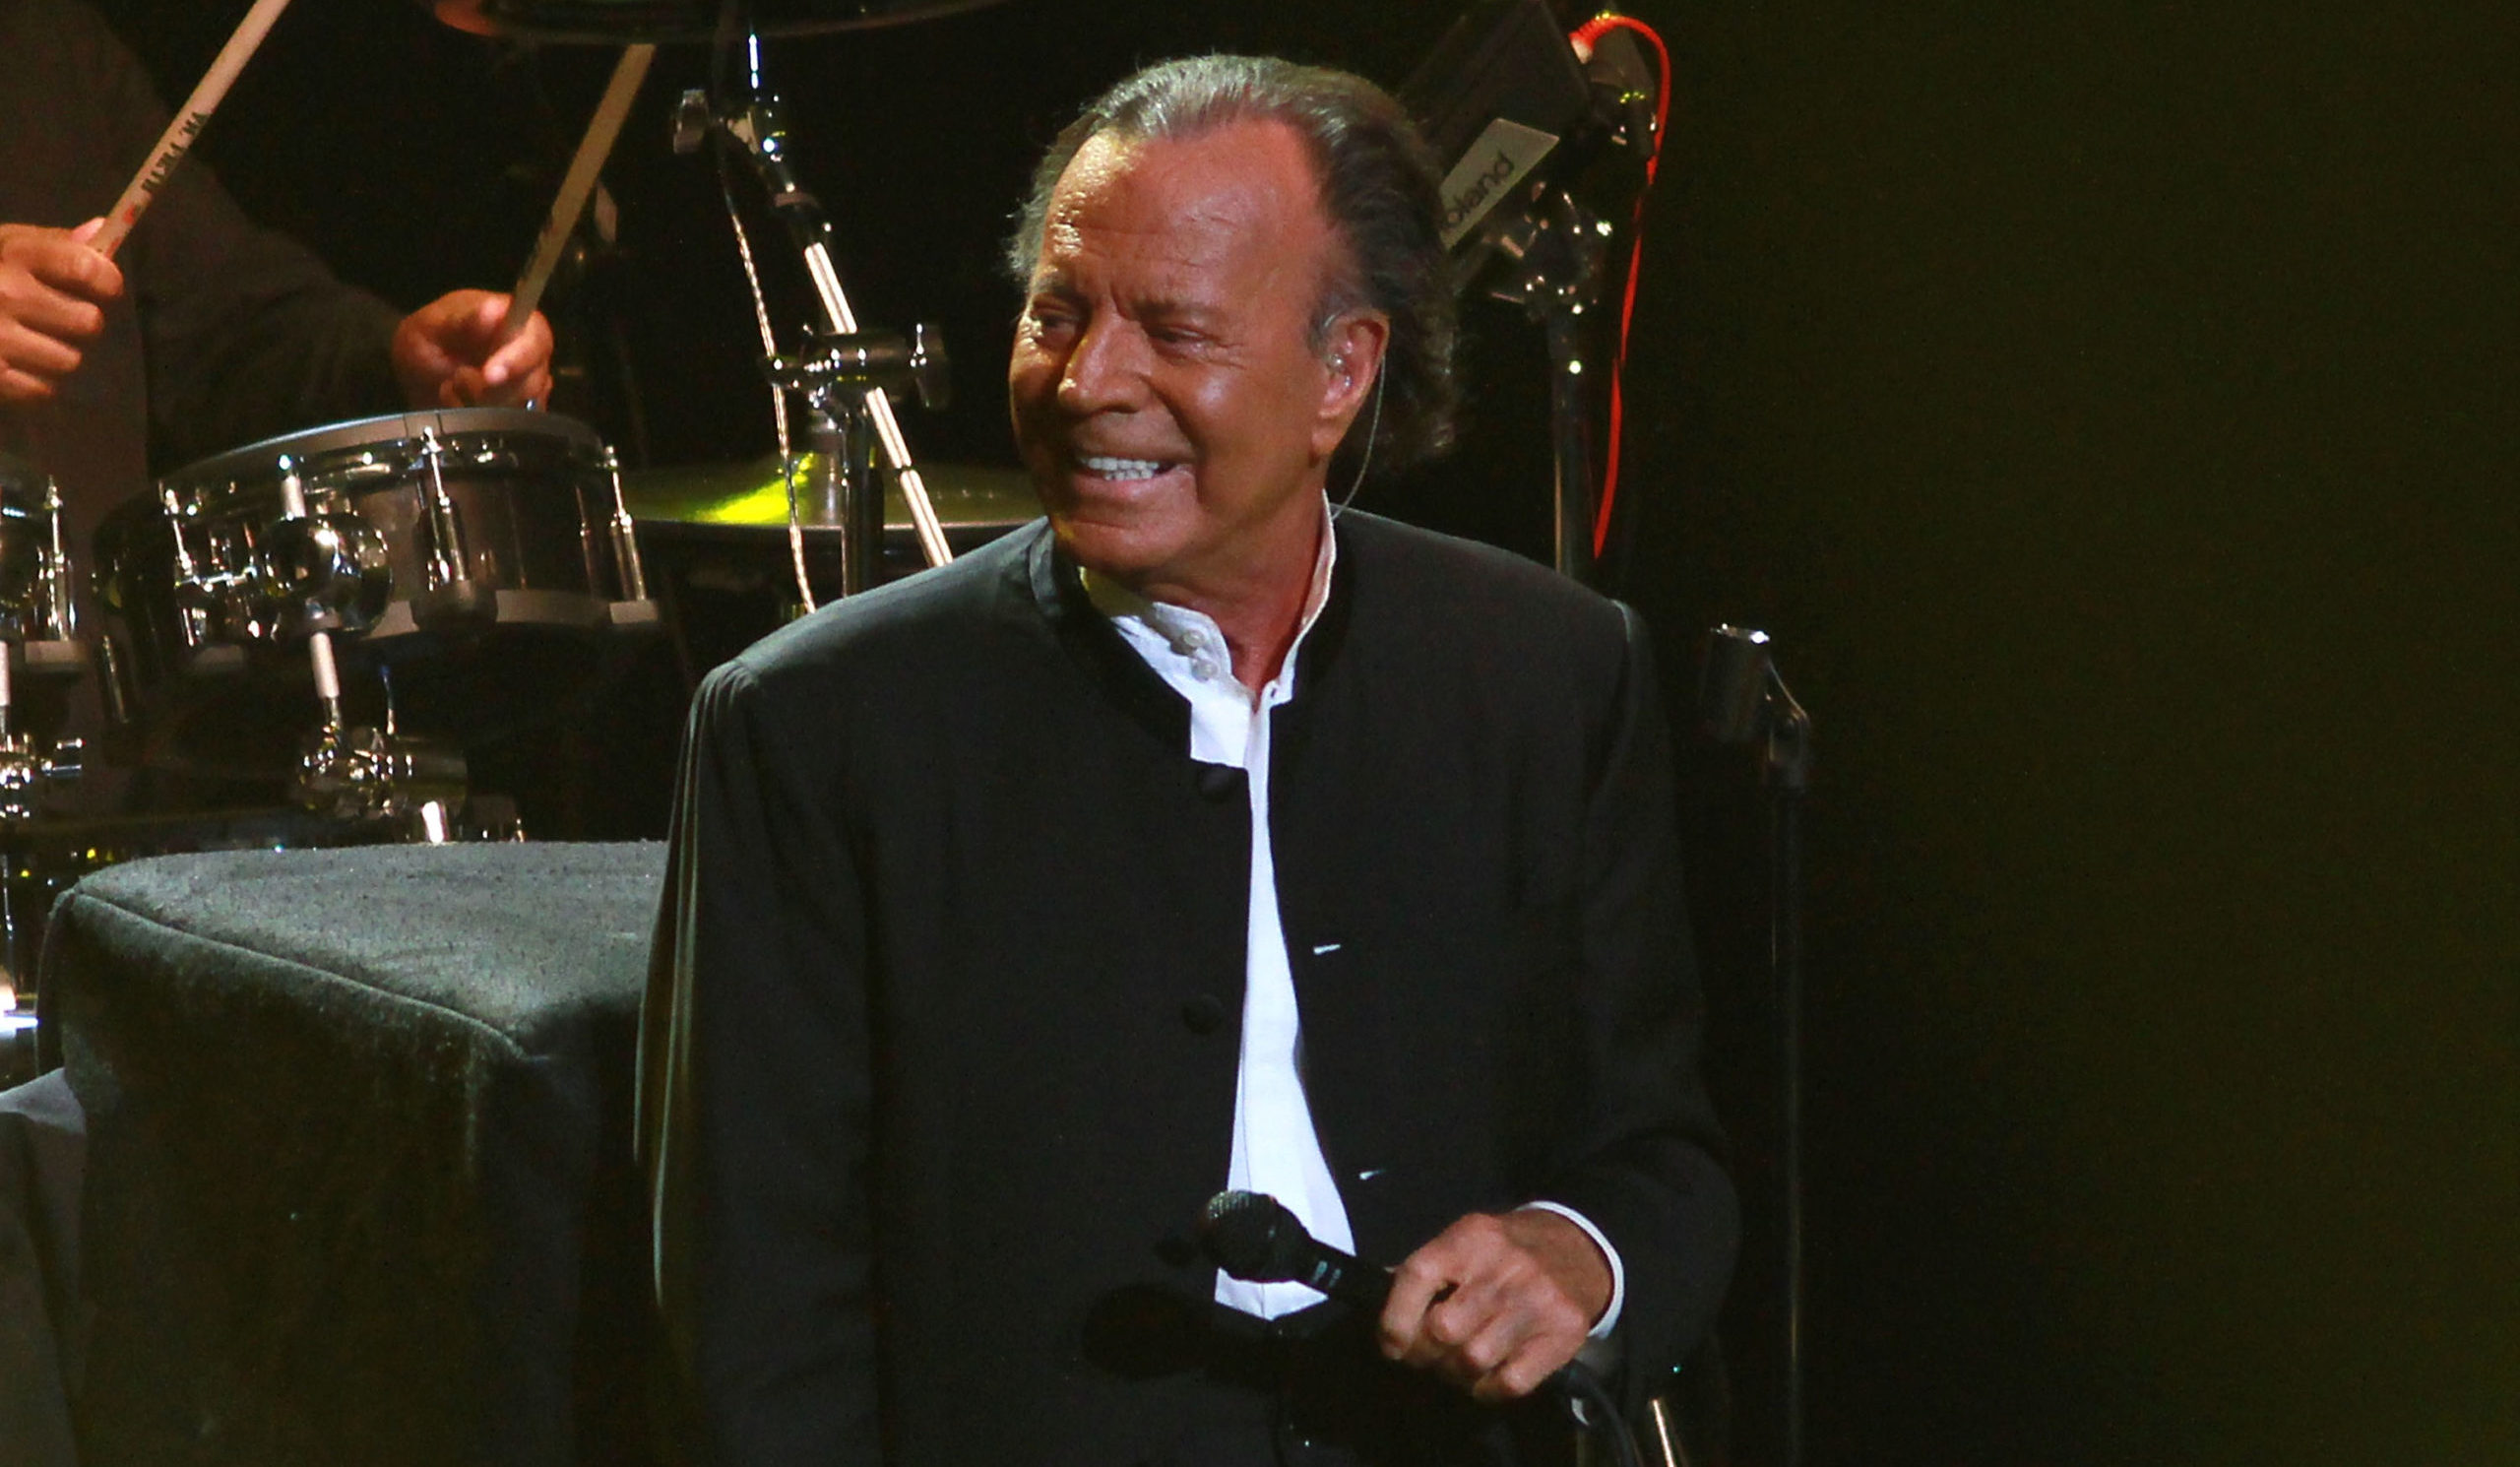 “They said I was in a wheelchair, that I had Alzheimer's,” Julio Iglesias responds.